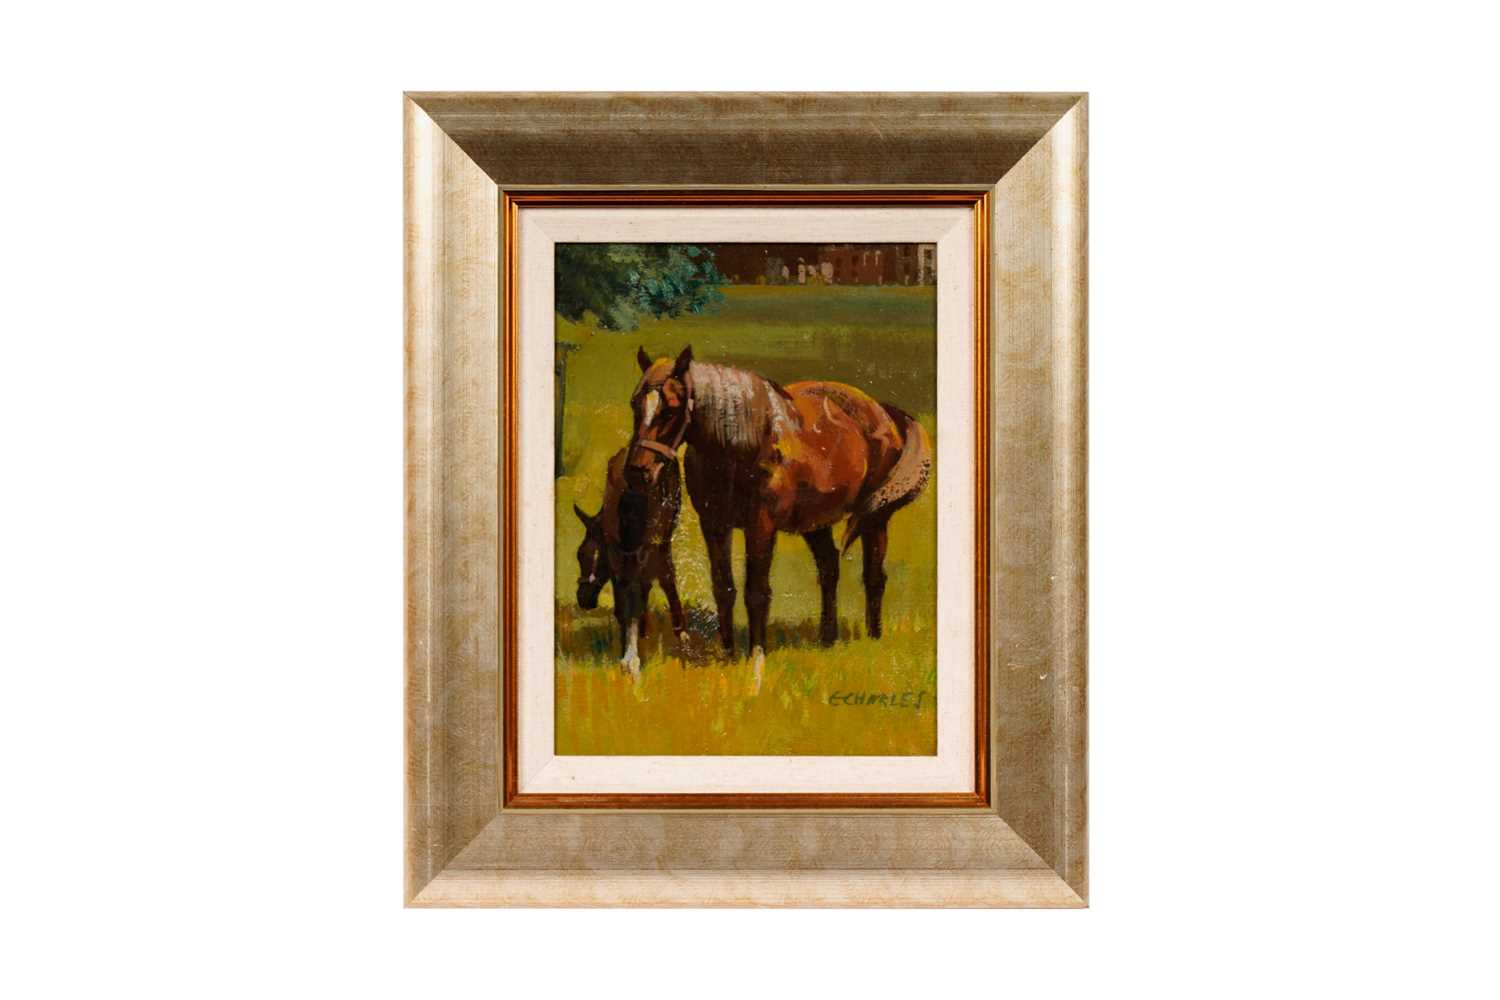 Lot 136 - E. Charles - A Mare and Her Foal | oil